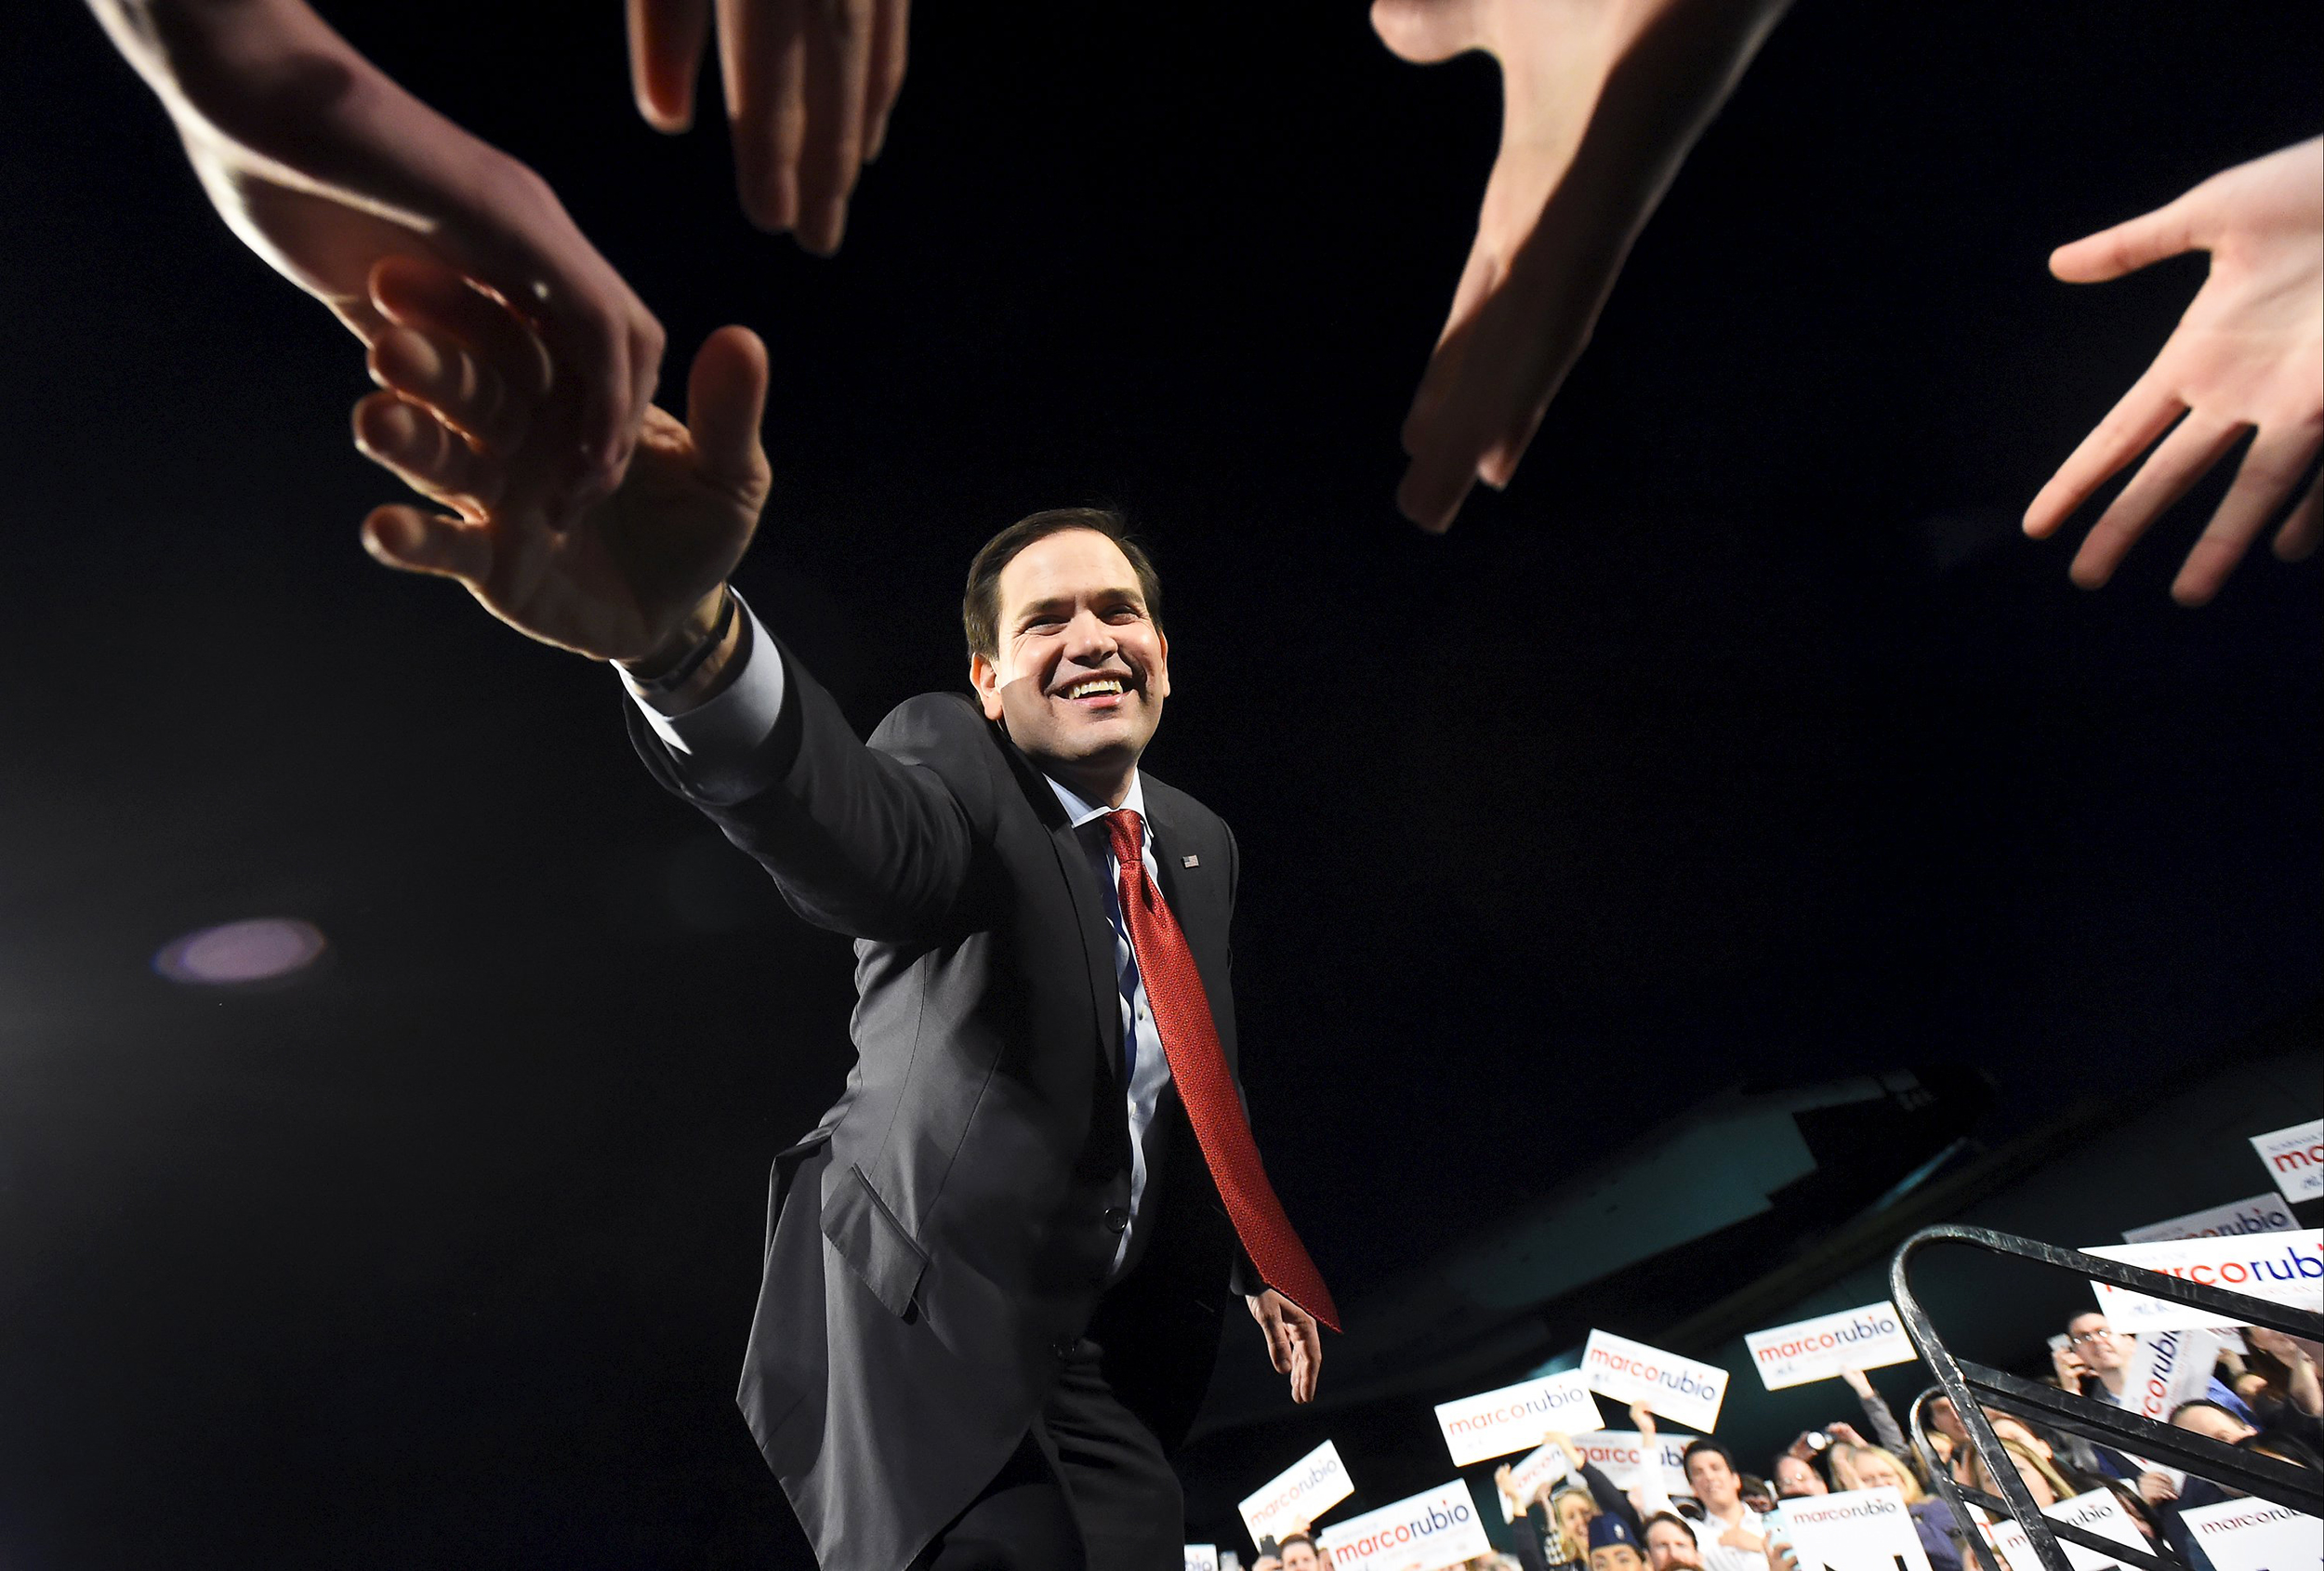 Republican U.S. presidential candidate Marco Rubio greets supporters during a campaign stop at the U.S. Space and Rocket Center in Huntsville,